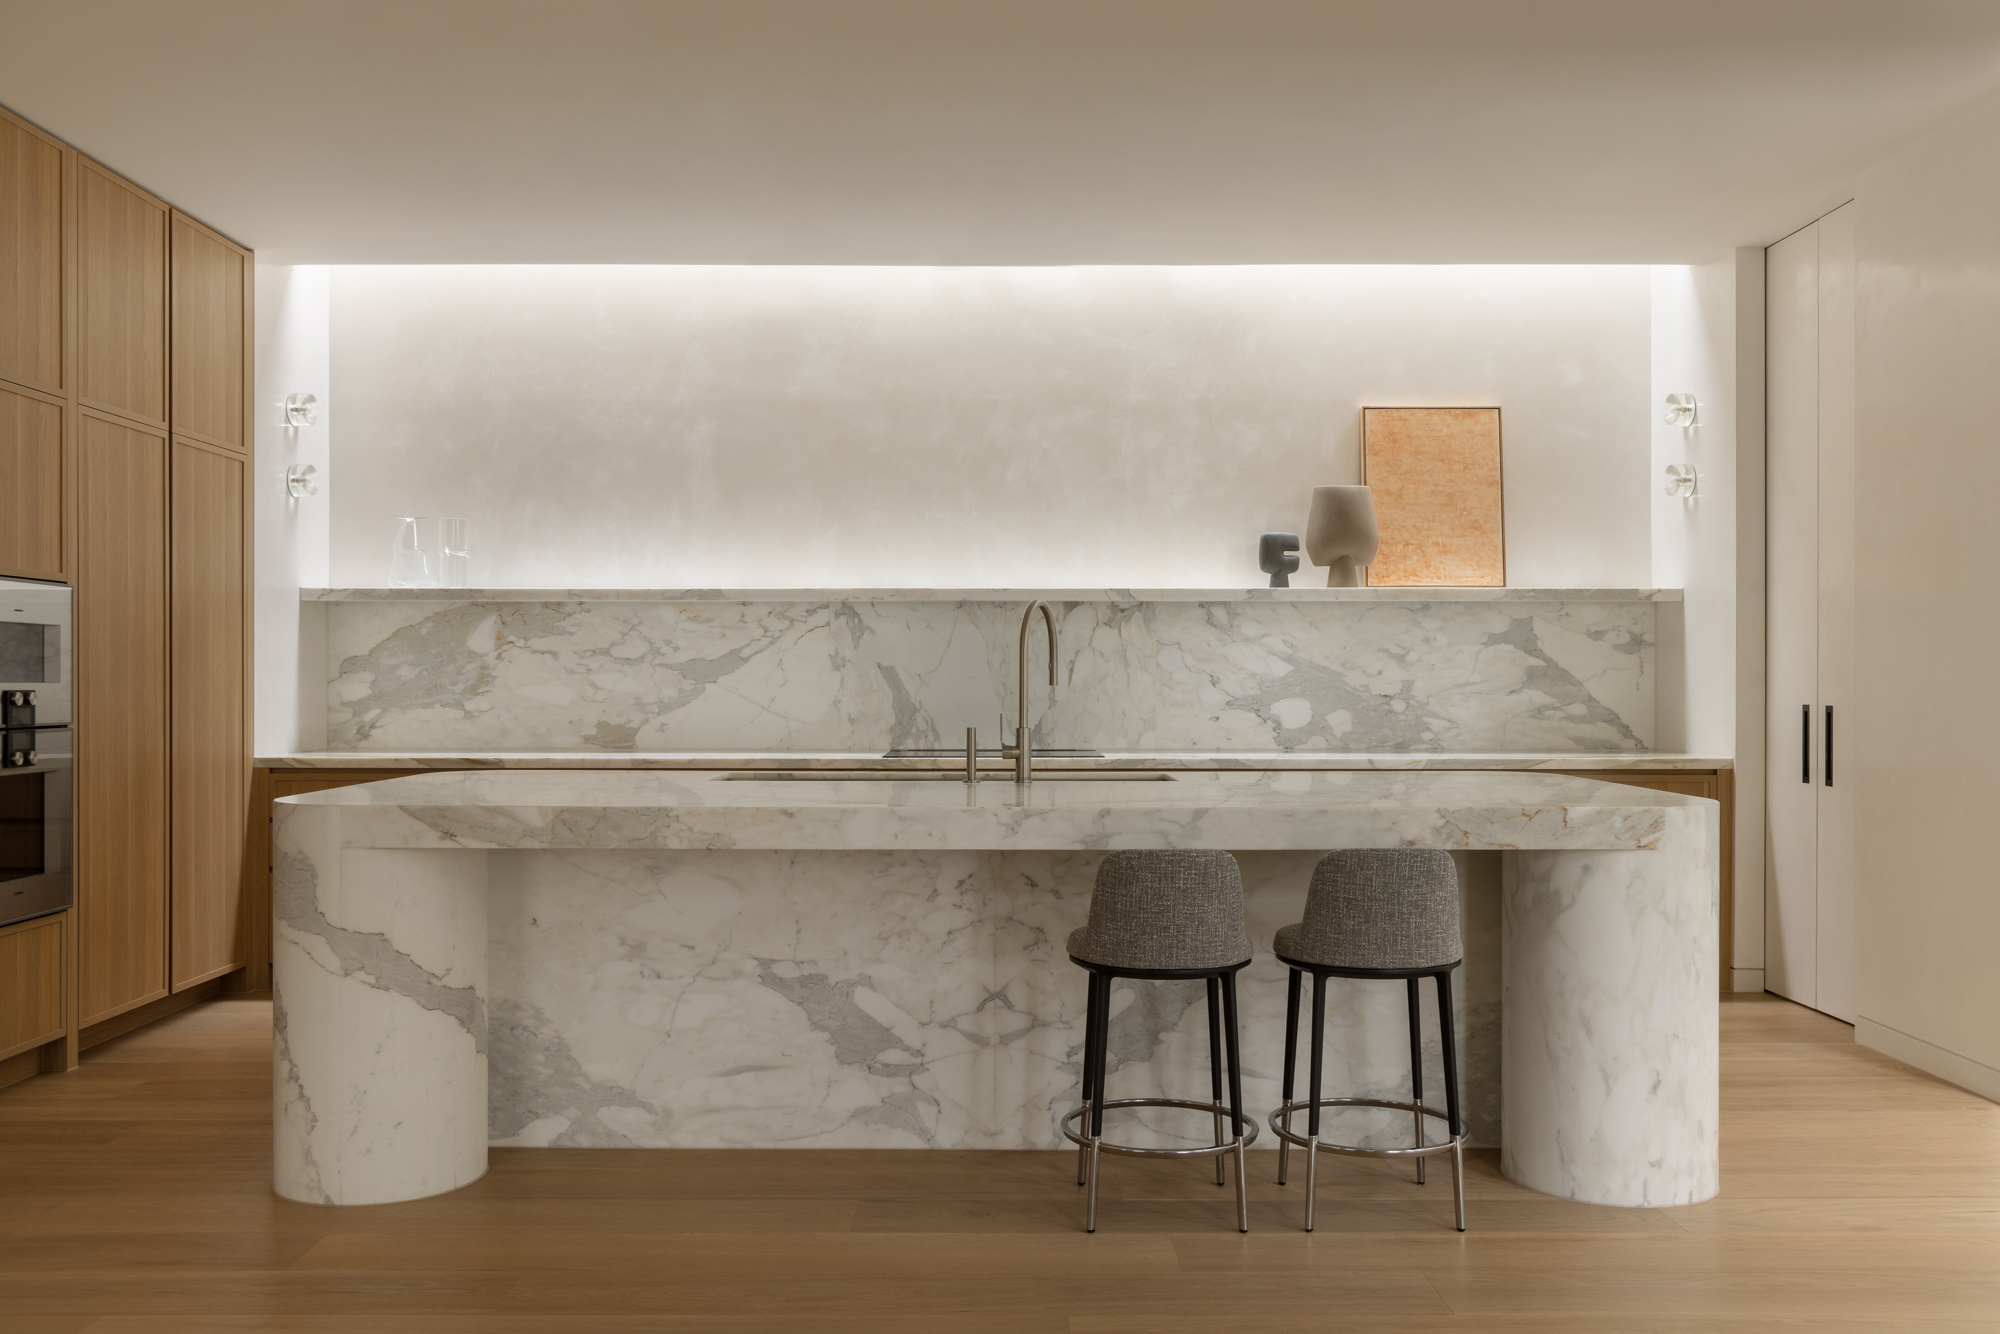 An interior shot of the kitchen at Balwyn House showing the white marble island bench and timber joinery